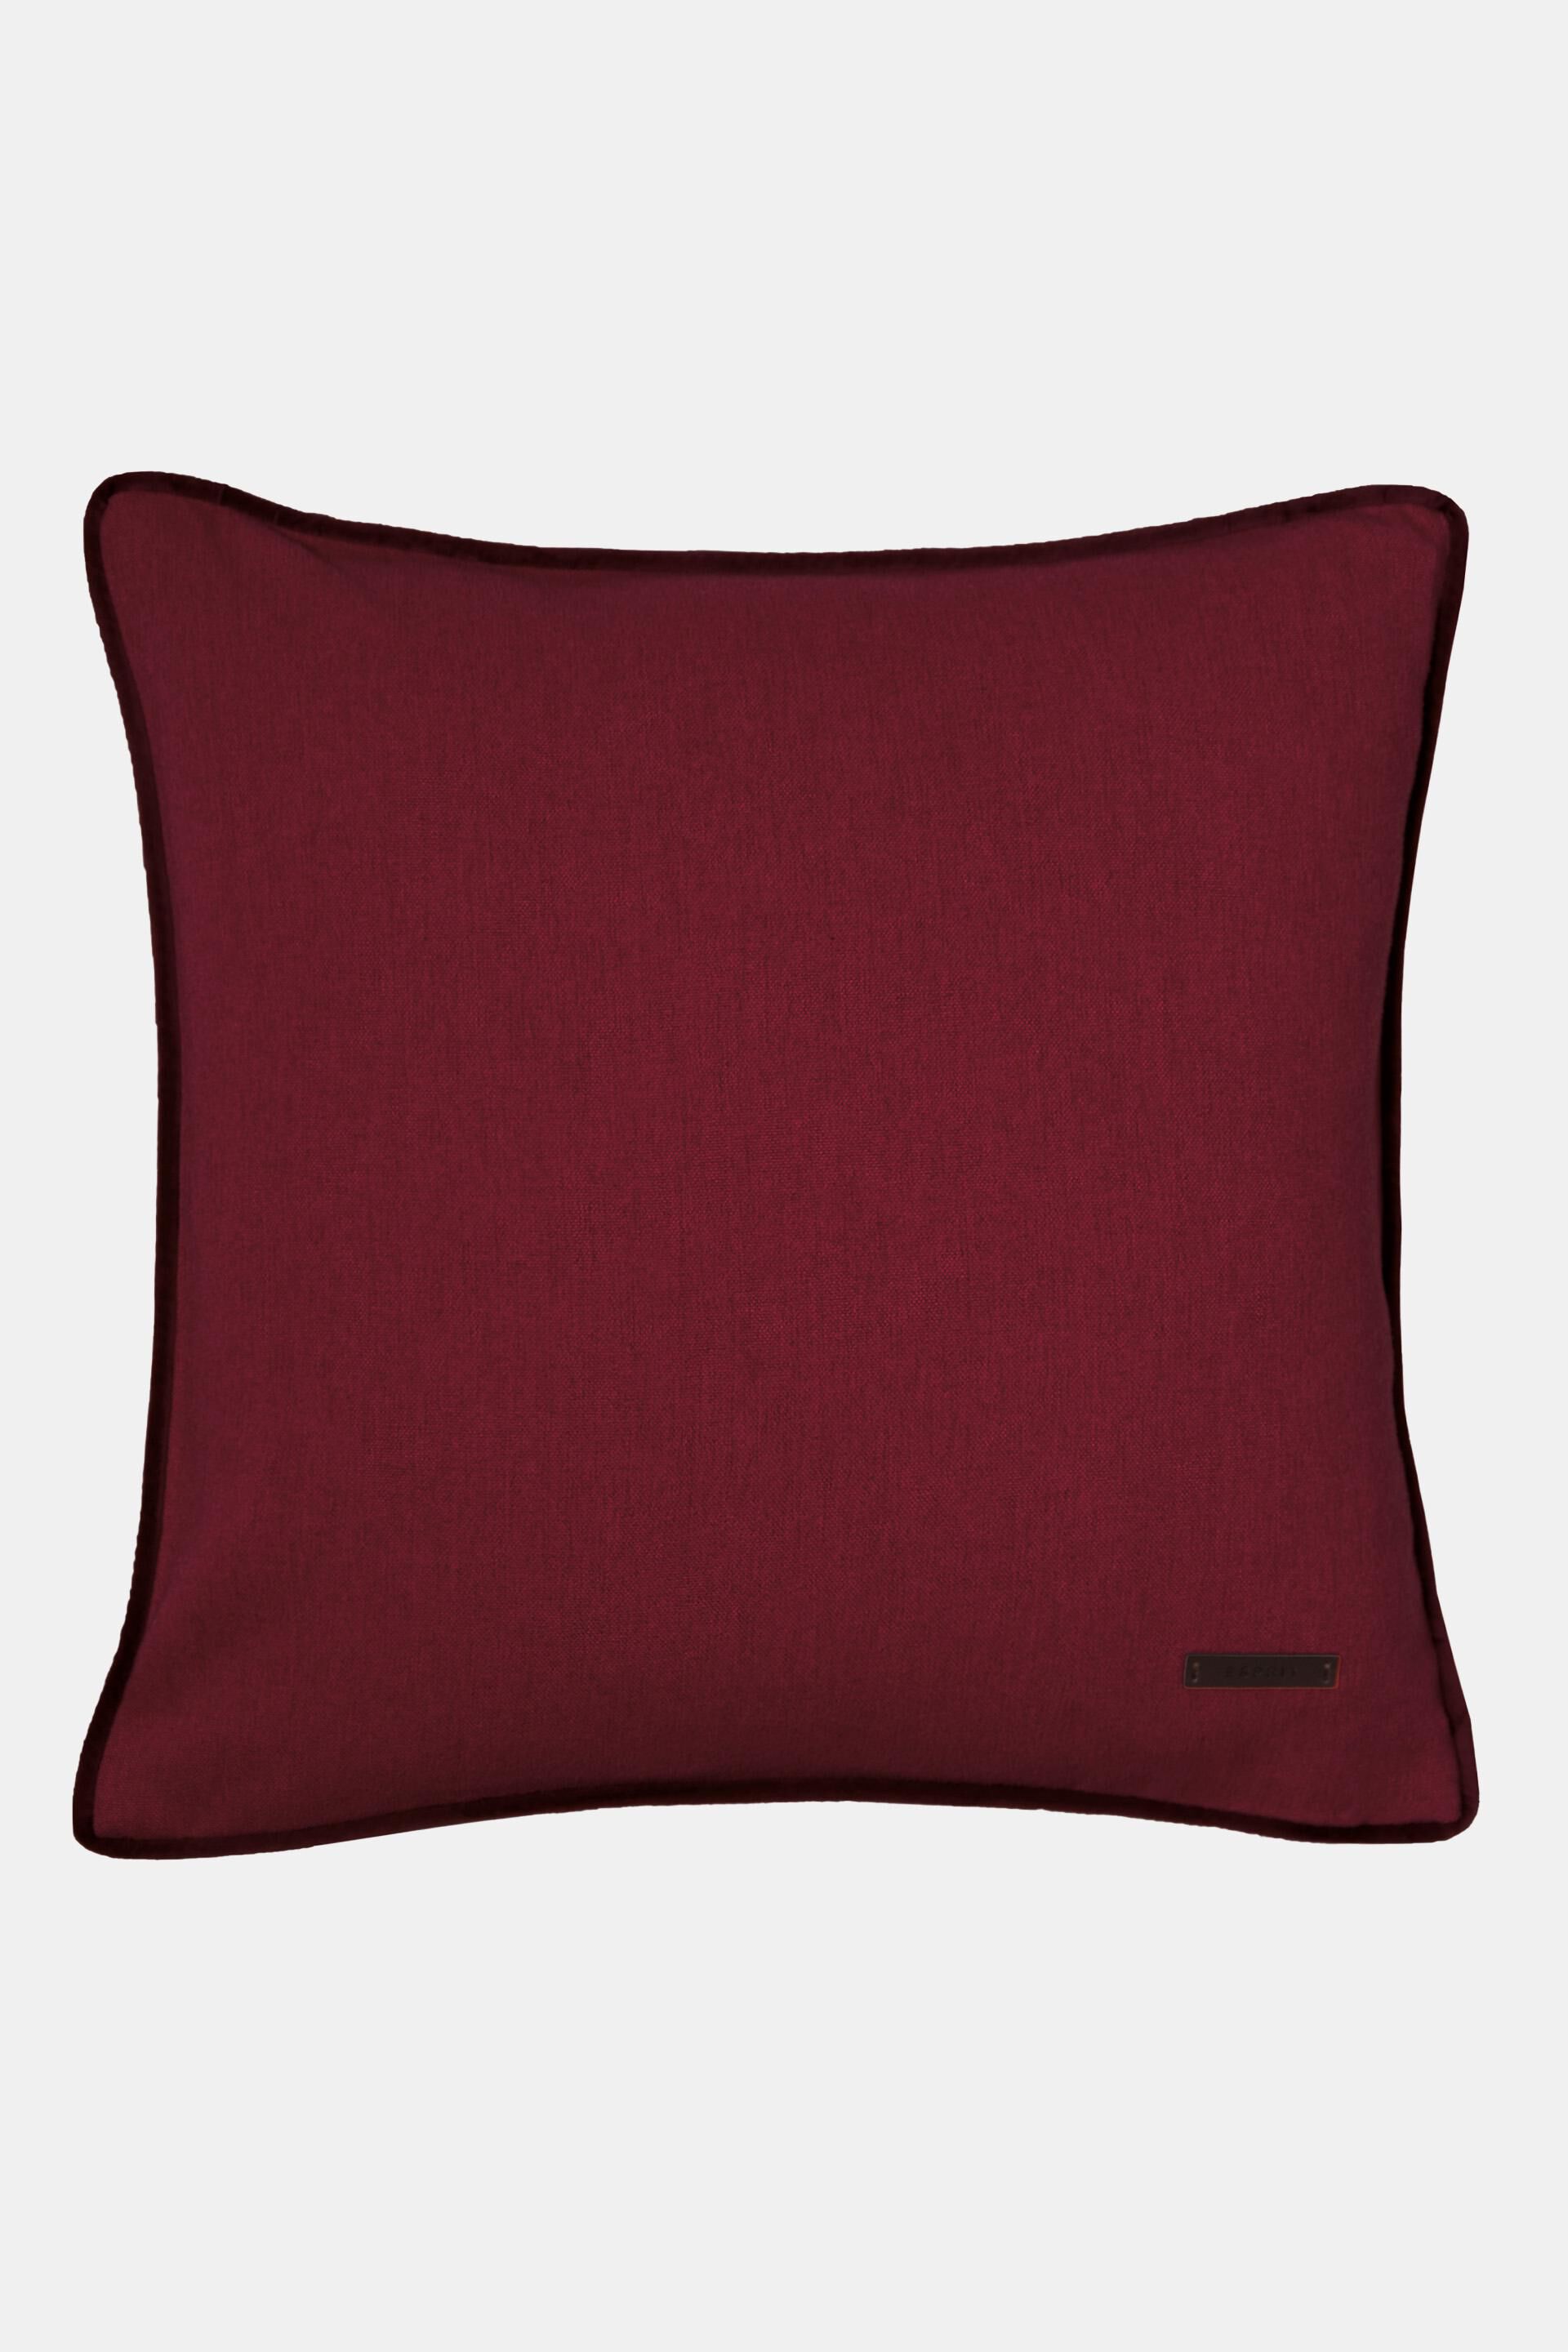 Esprit velvet cover cushion piping Decorative with